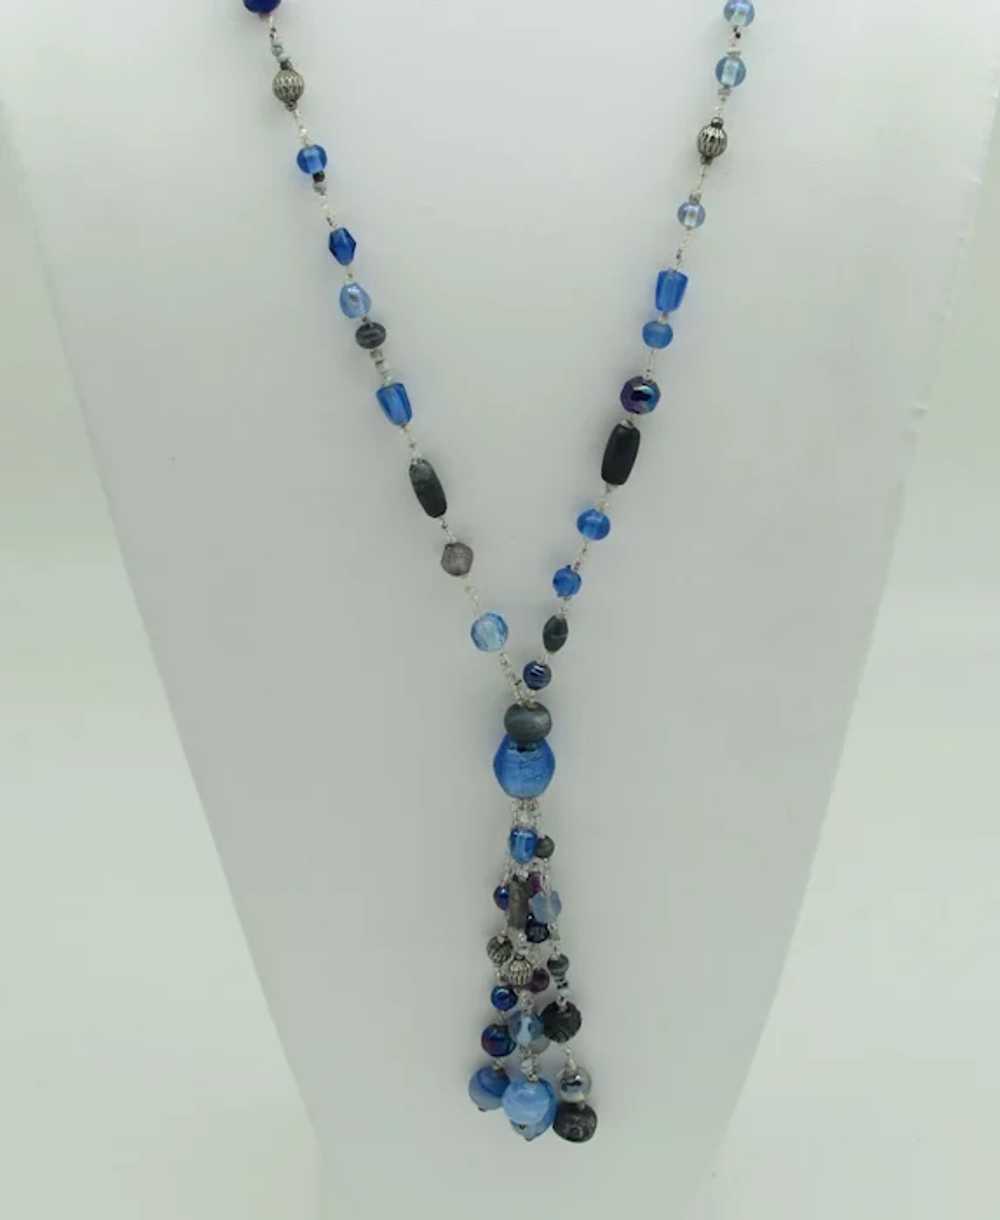 Art Deco Style Bead Necklace with Tassel - image 3